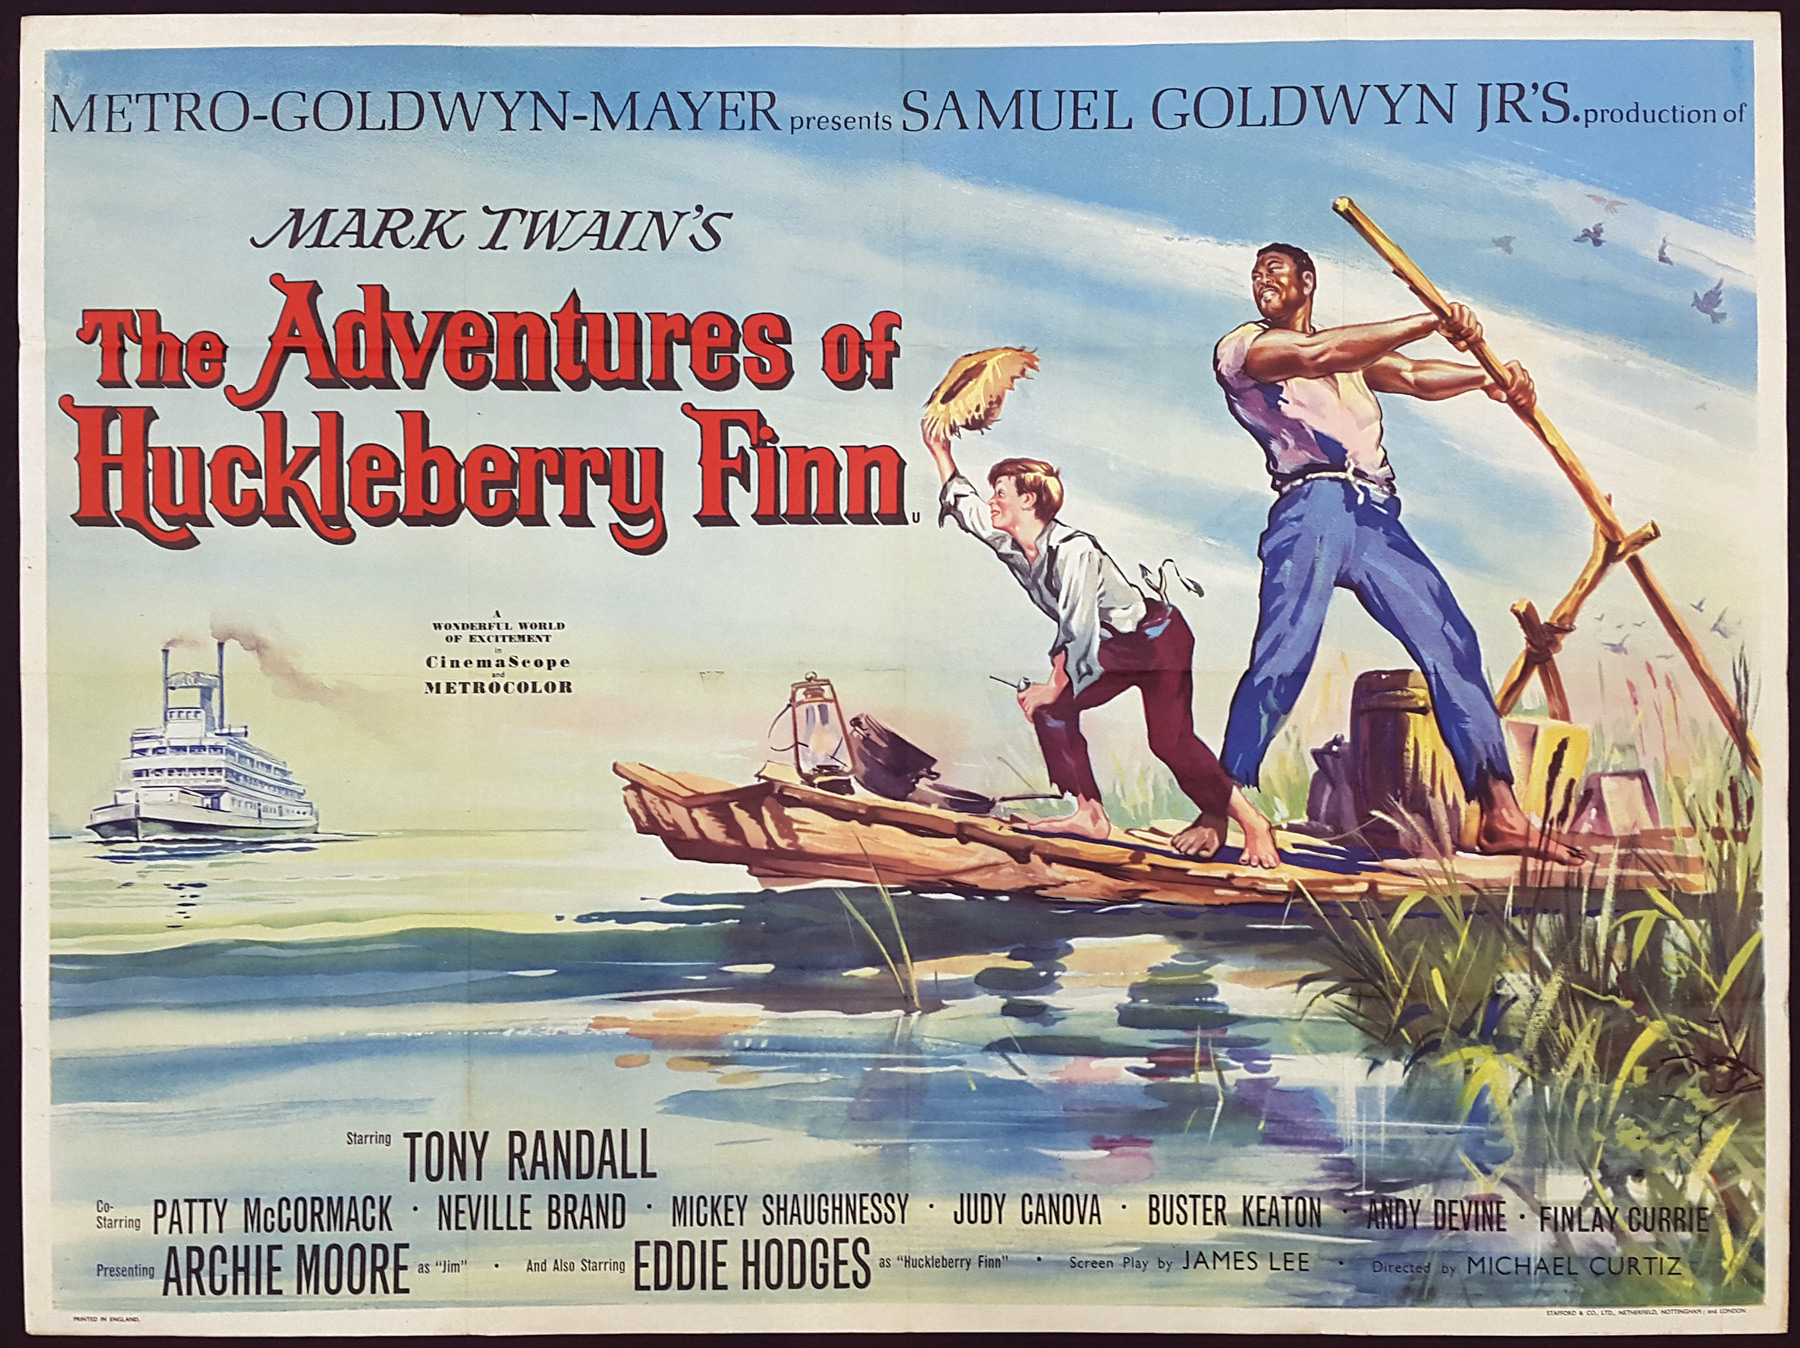 download the last version for windows The Adventures of Huckleberry Finn